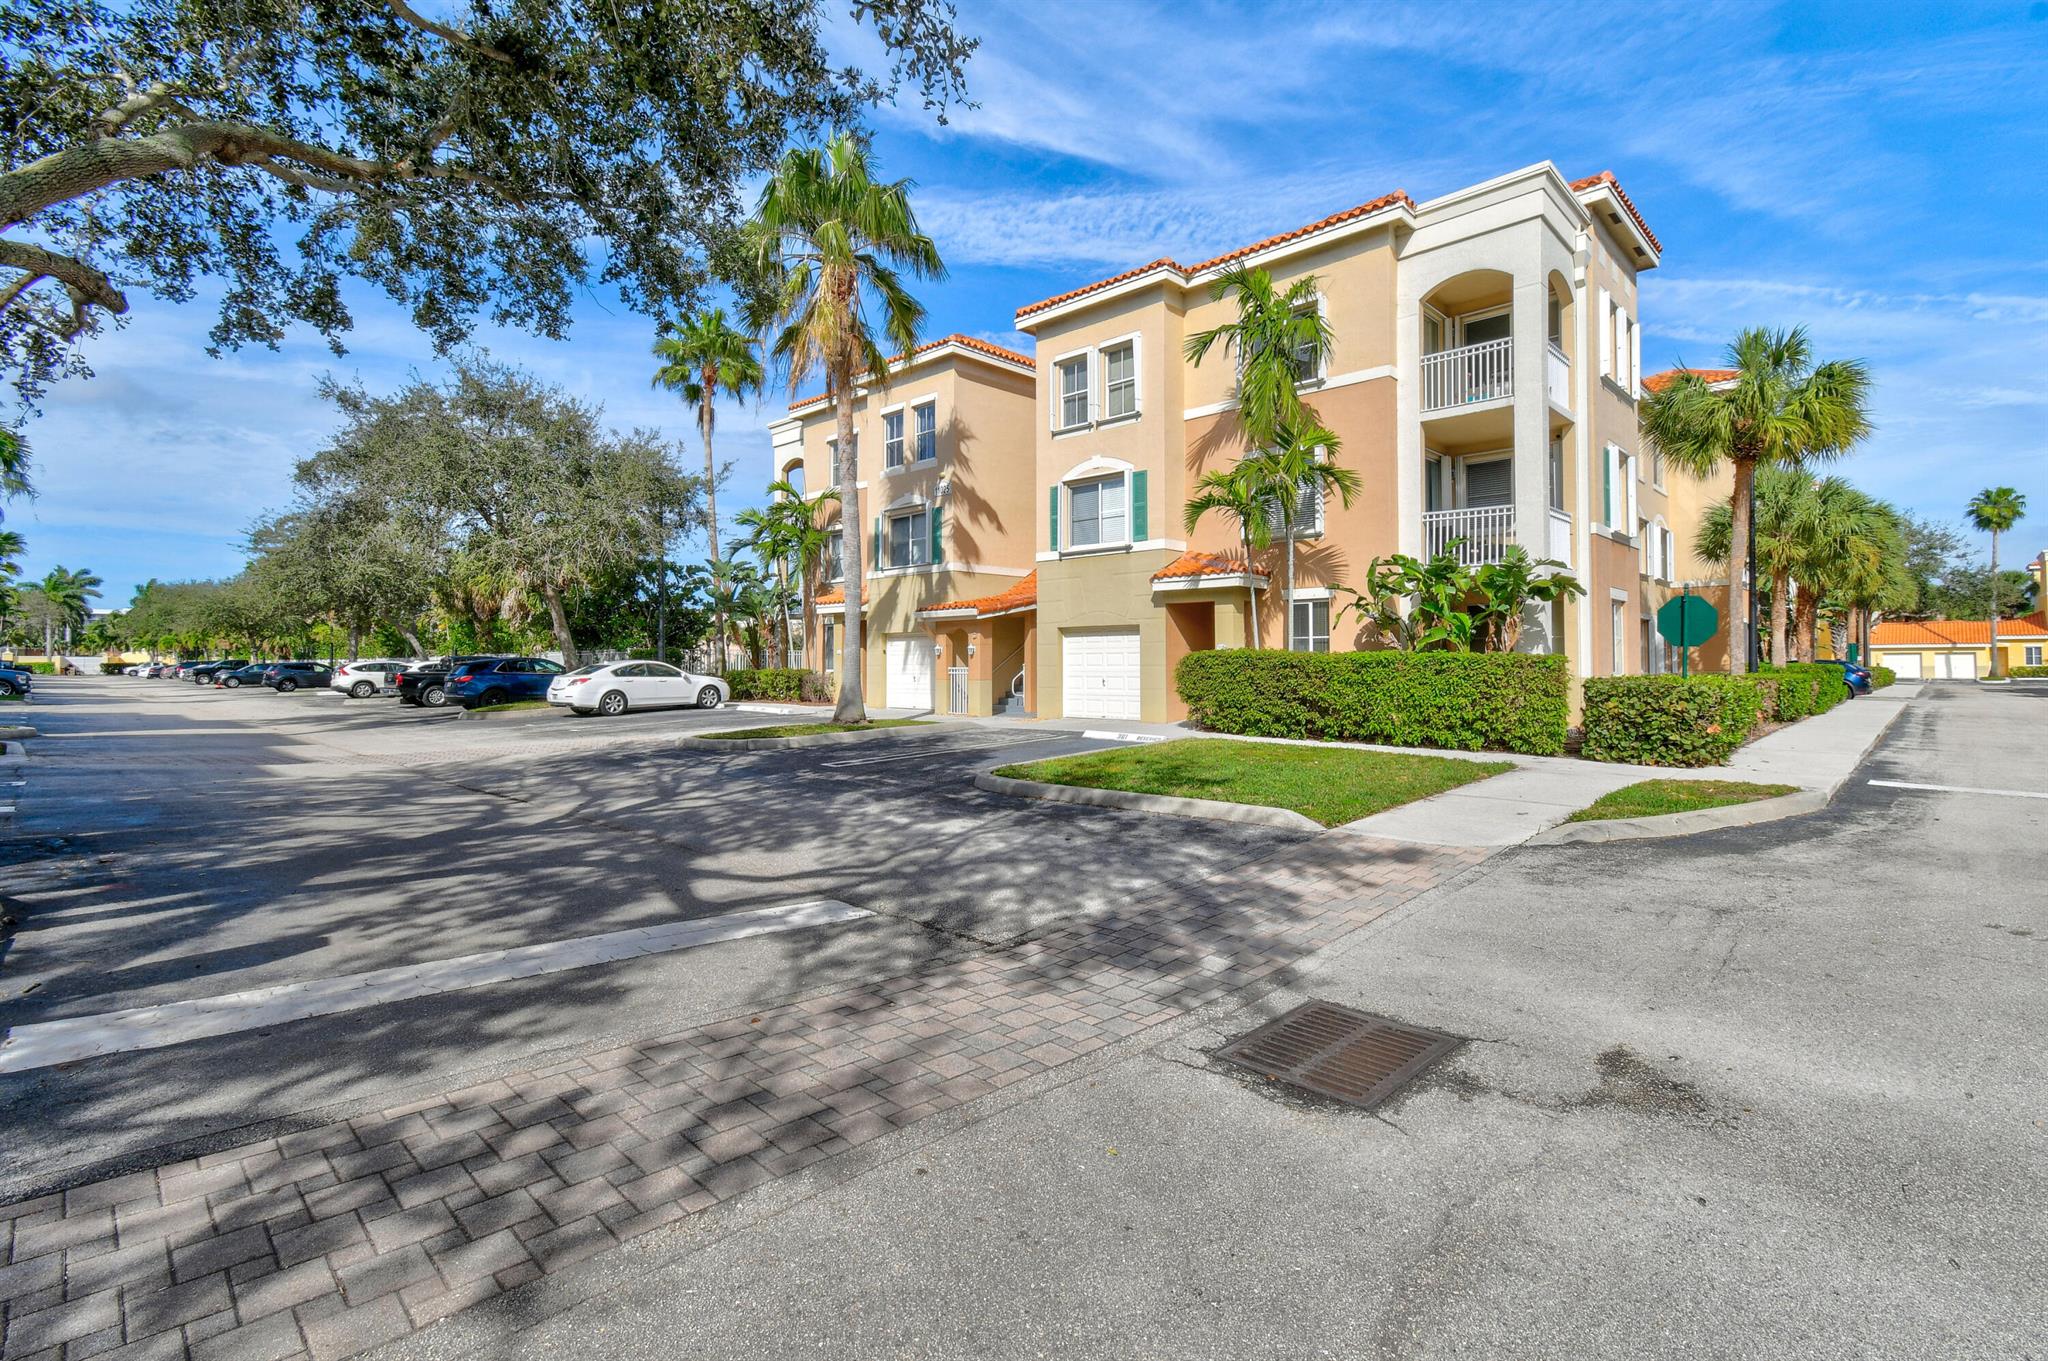 Rarely available first floor unit in desirable Legacy Place!! Enjoy resort-style living in the heart of Palm Beach Gardens. Discover the exceptional living experience at Residence at Legacy Place Condos. Boasting a prime location that seamlessly connects you to shopping, beaches, public transportation, restaurants, and PBI airport, this residence is the epitome of convenience. Nestled within a gated community, you'll enjoy access to a clubhouse, a picturesque pool and spa, tennis courts, a fitness center, and a business center. Make this your home today and elevate your lifestyle in this well-appointed community.